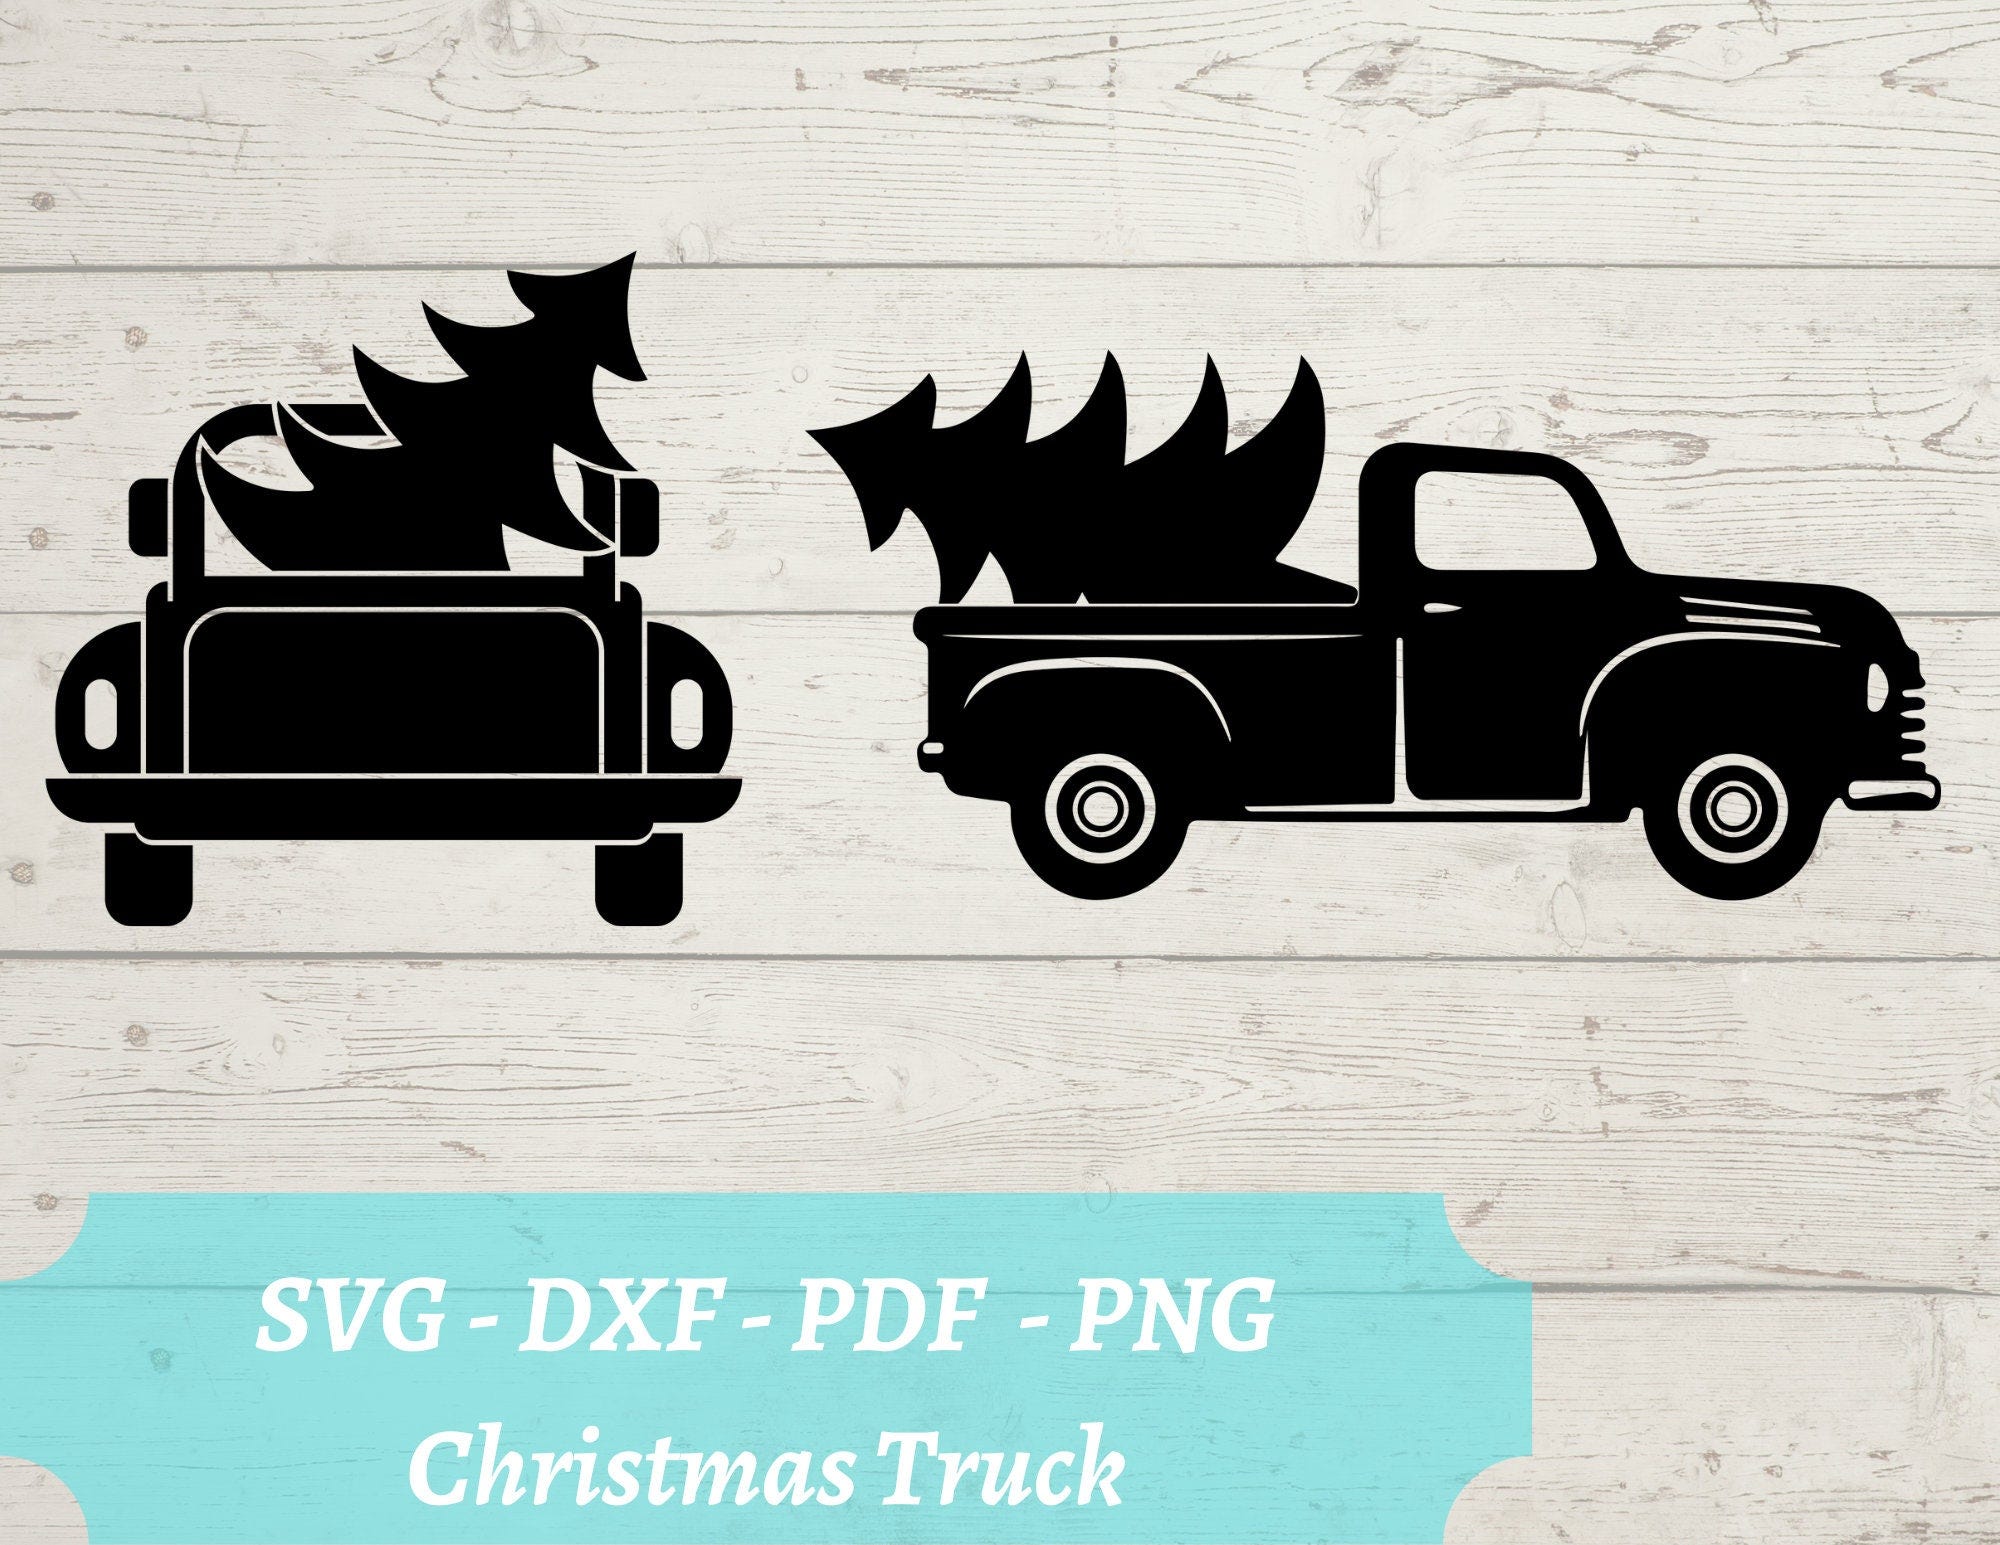 Christmas Truck SVG Laser Cut File, Class Truck and Christmas Tree, Download Digital File for glowforge, cricut, svg, dxf, png